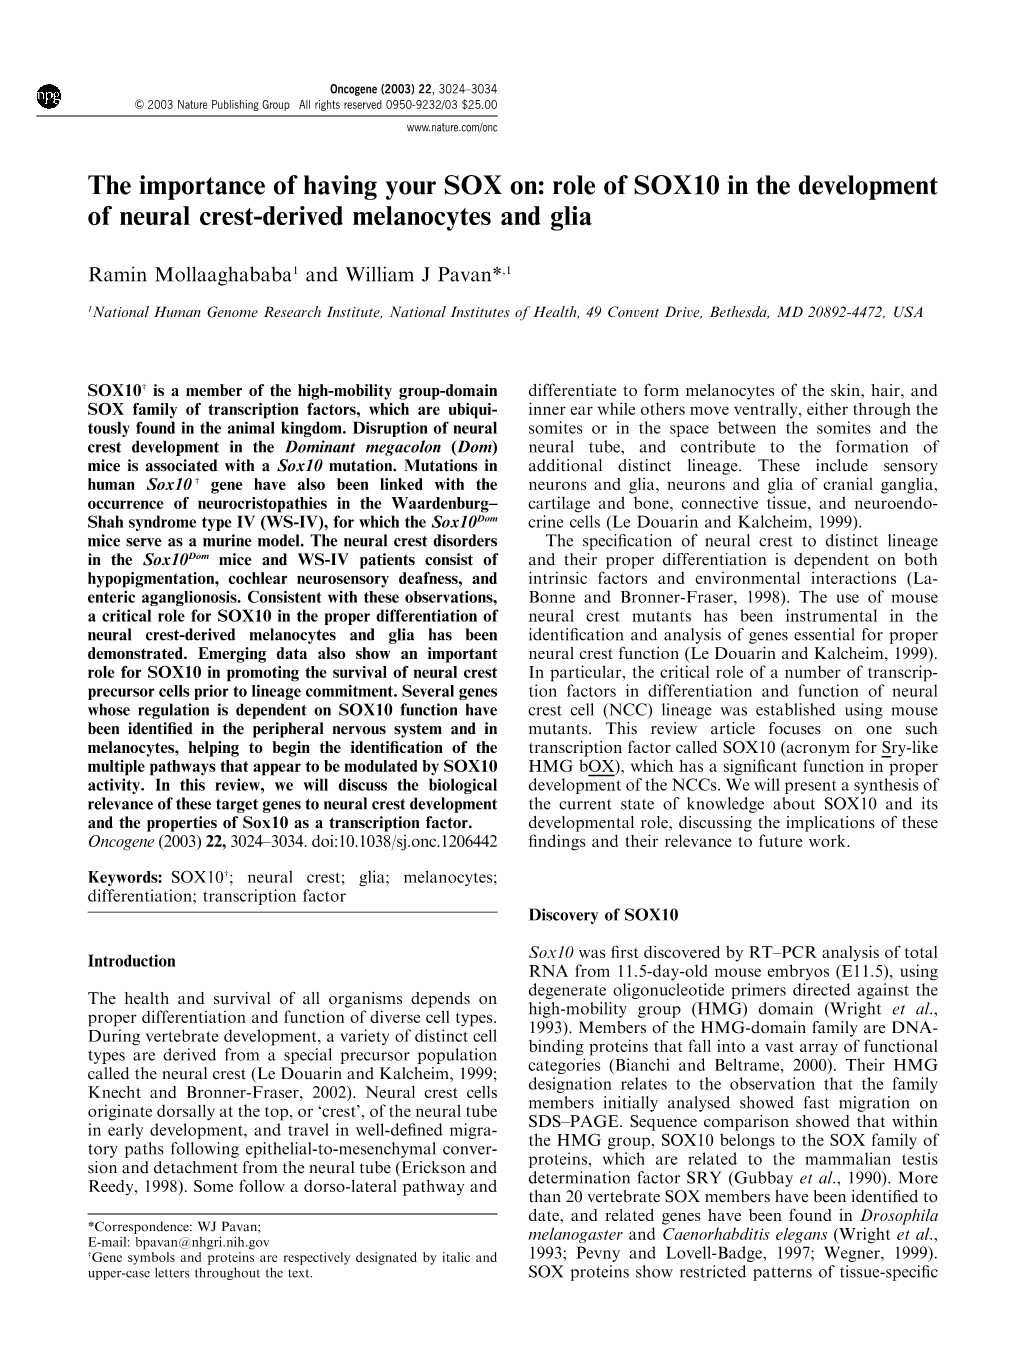 Role of SOX10 in the Development of Neural Crest-Derived Melanocytes and Glia